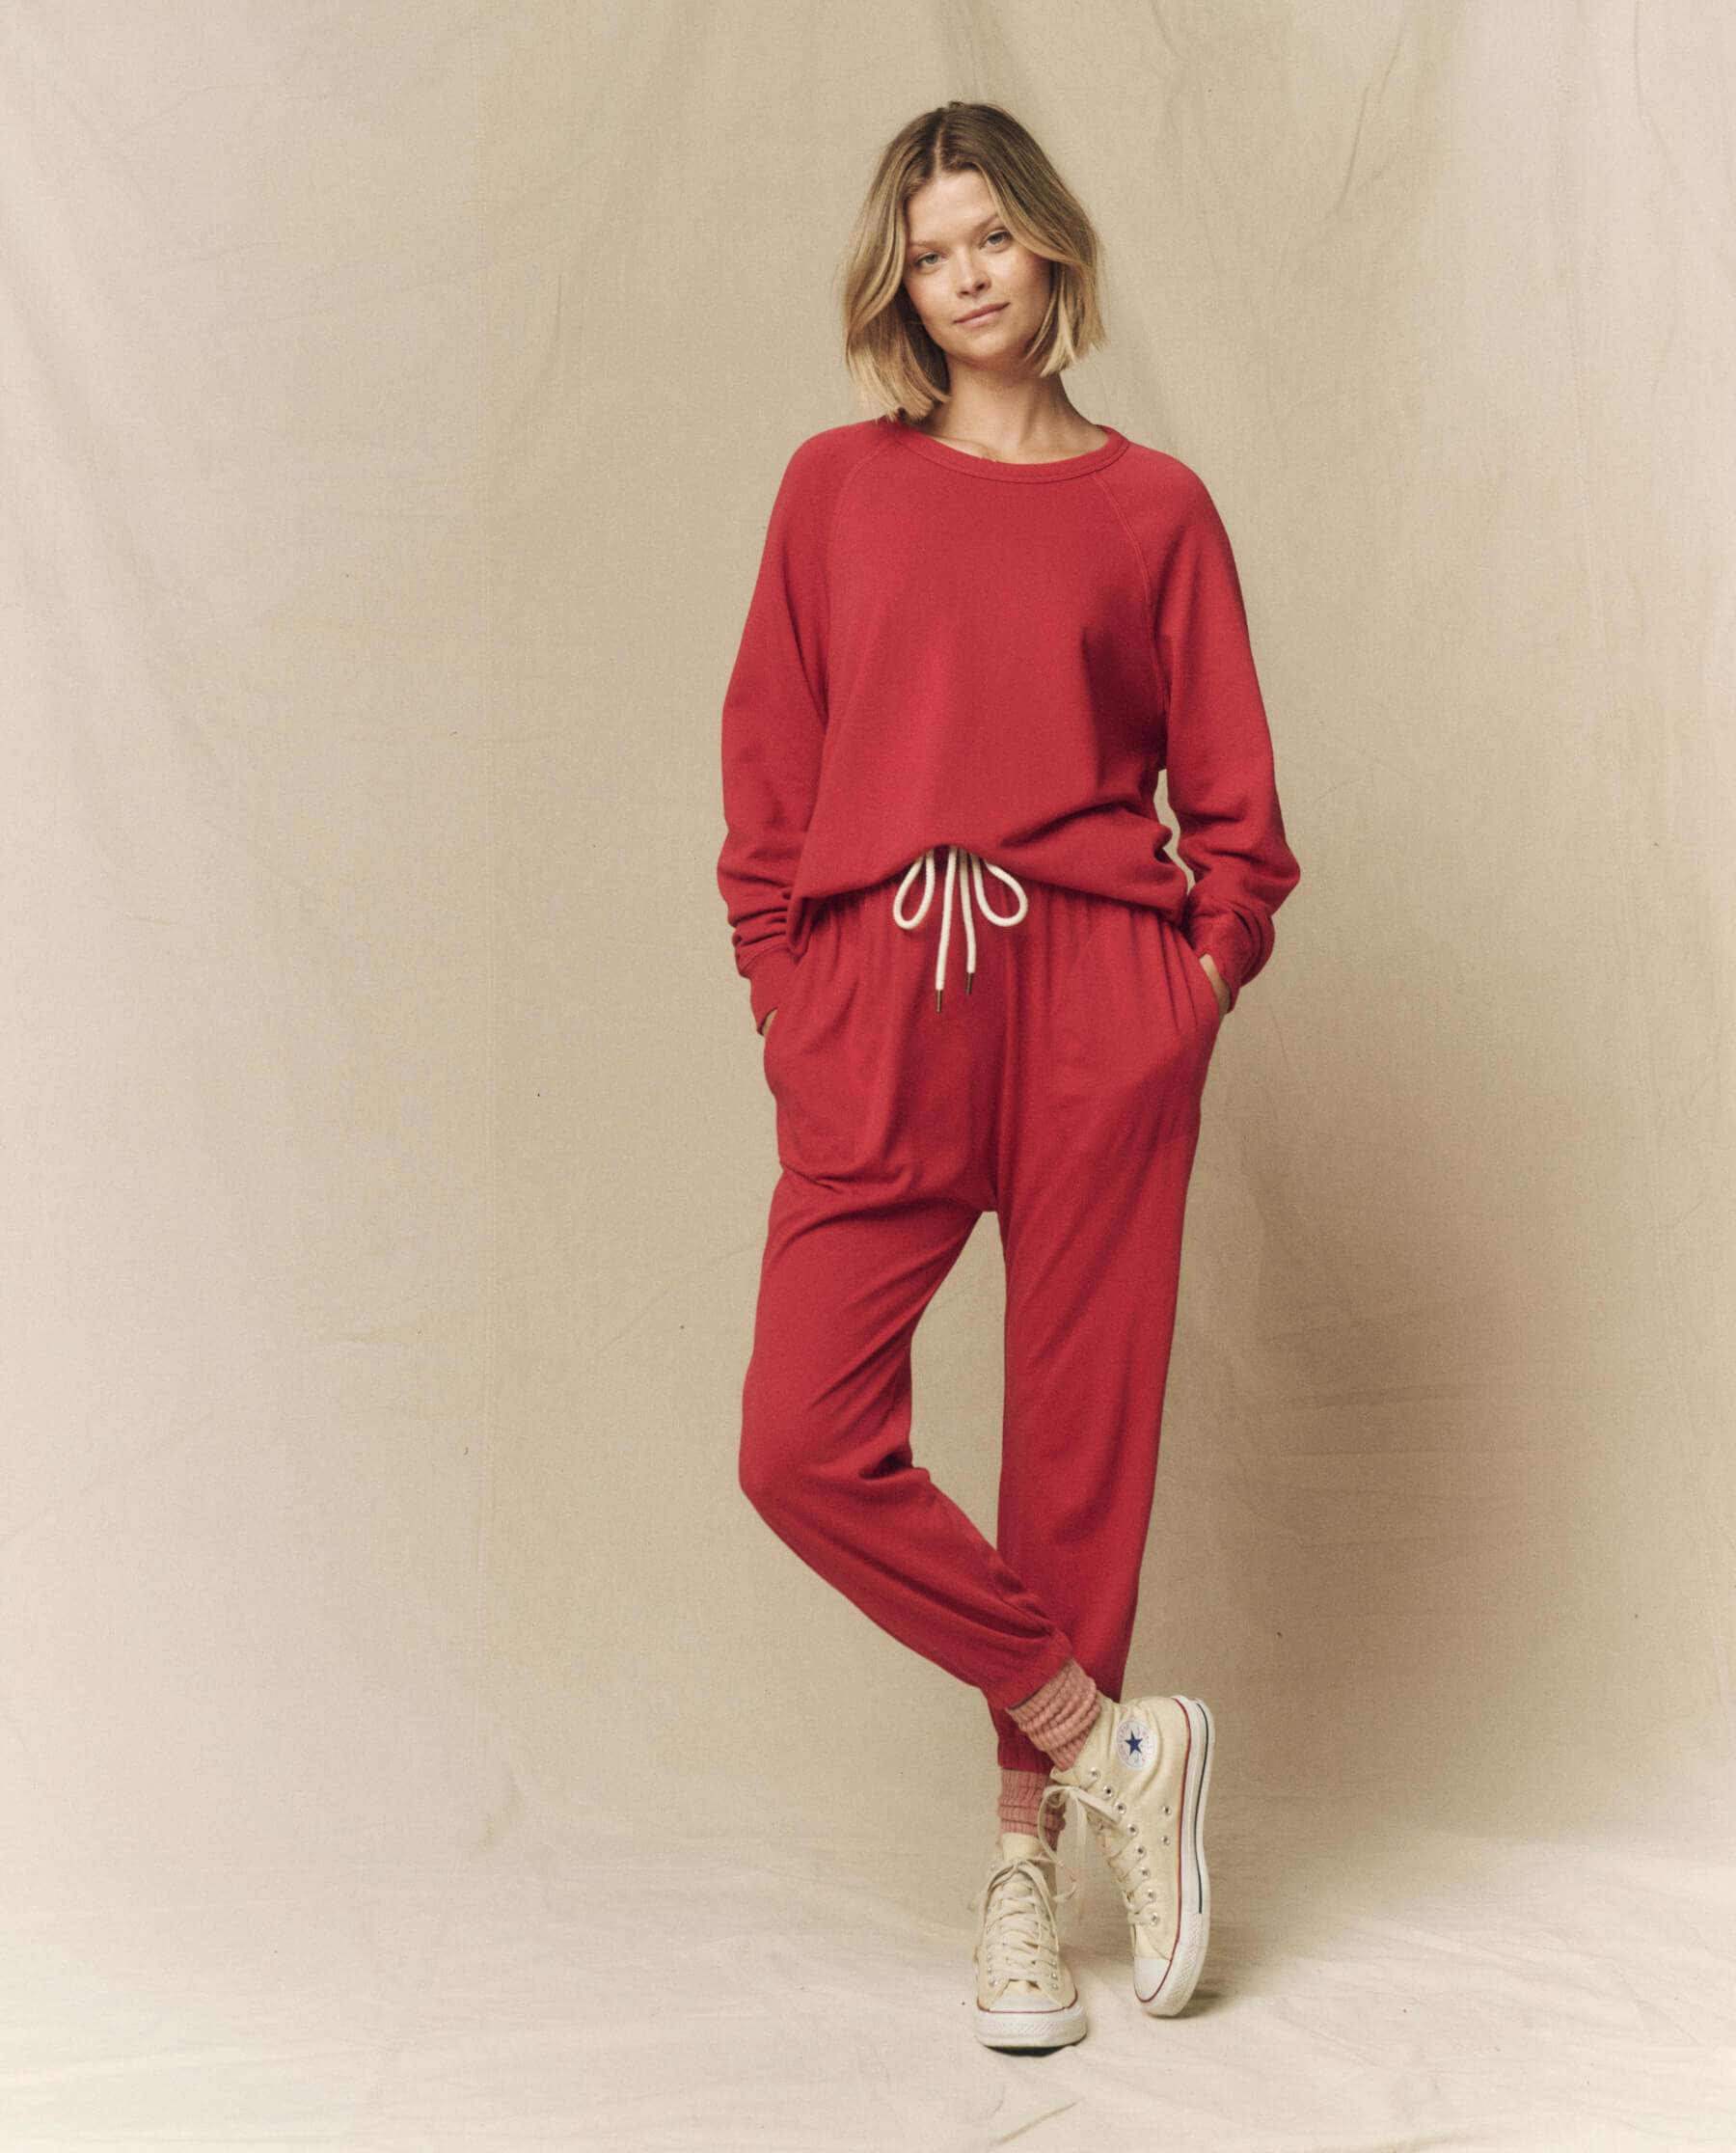 The Jersey Jogger Pant. -- Gemstone SWEATPANTS THE GREAT. FALL 23 KNITS